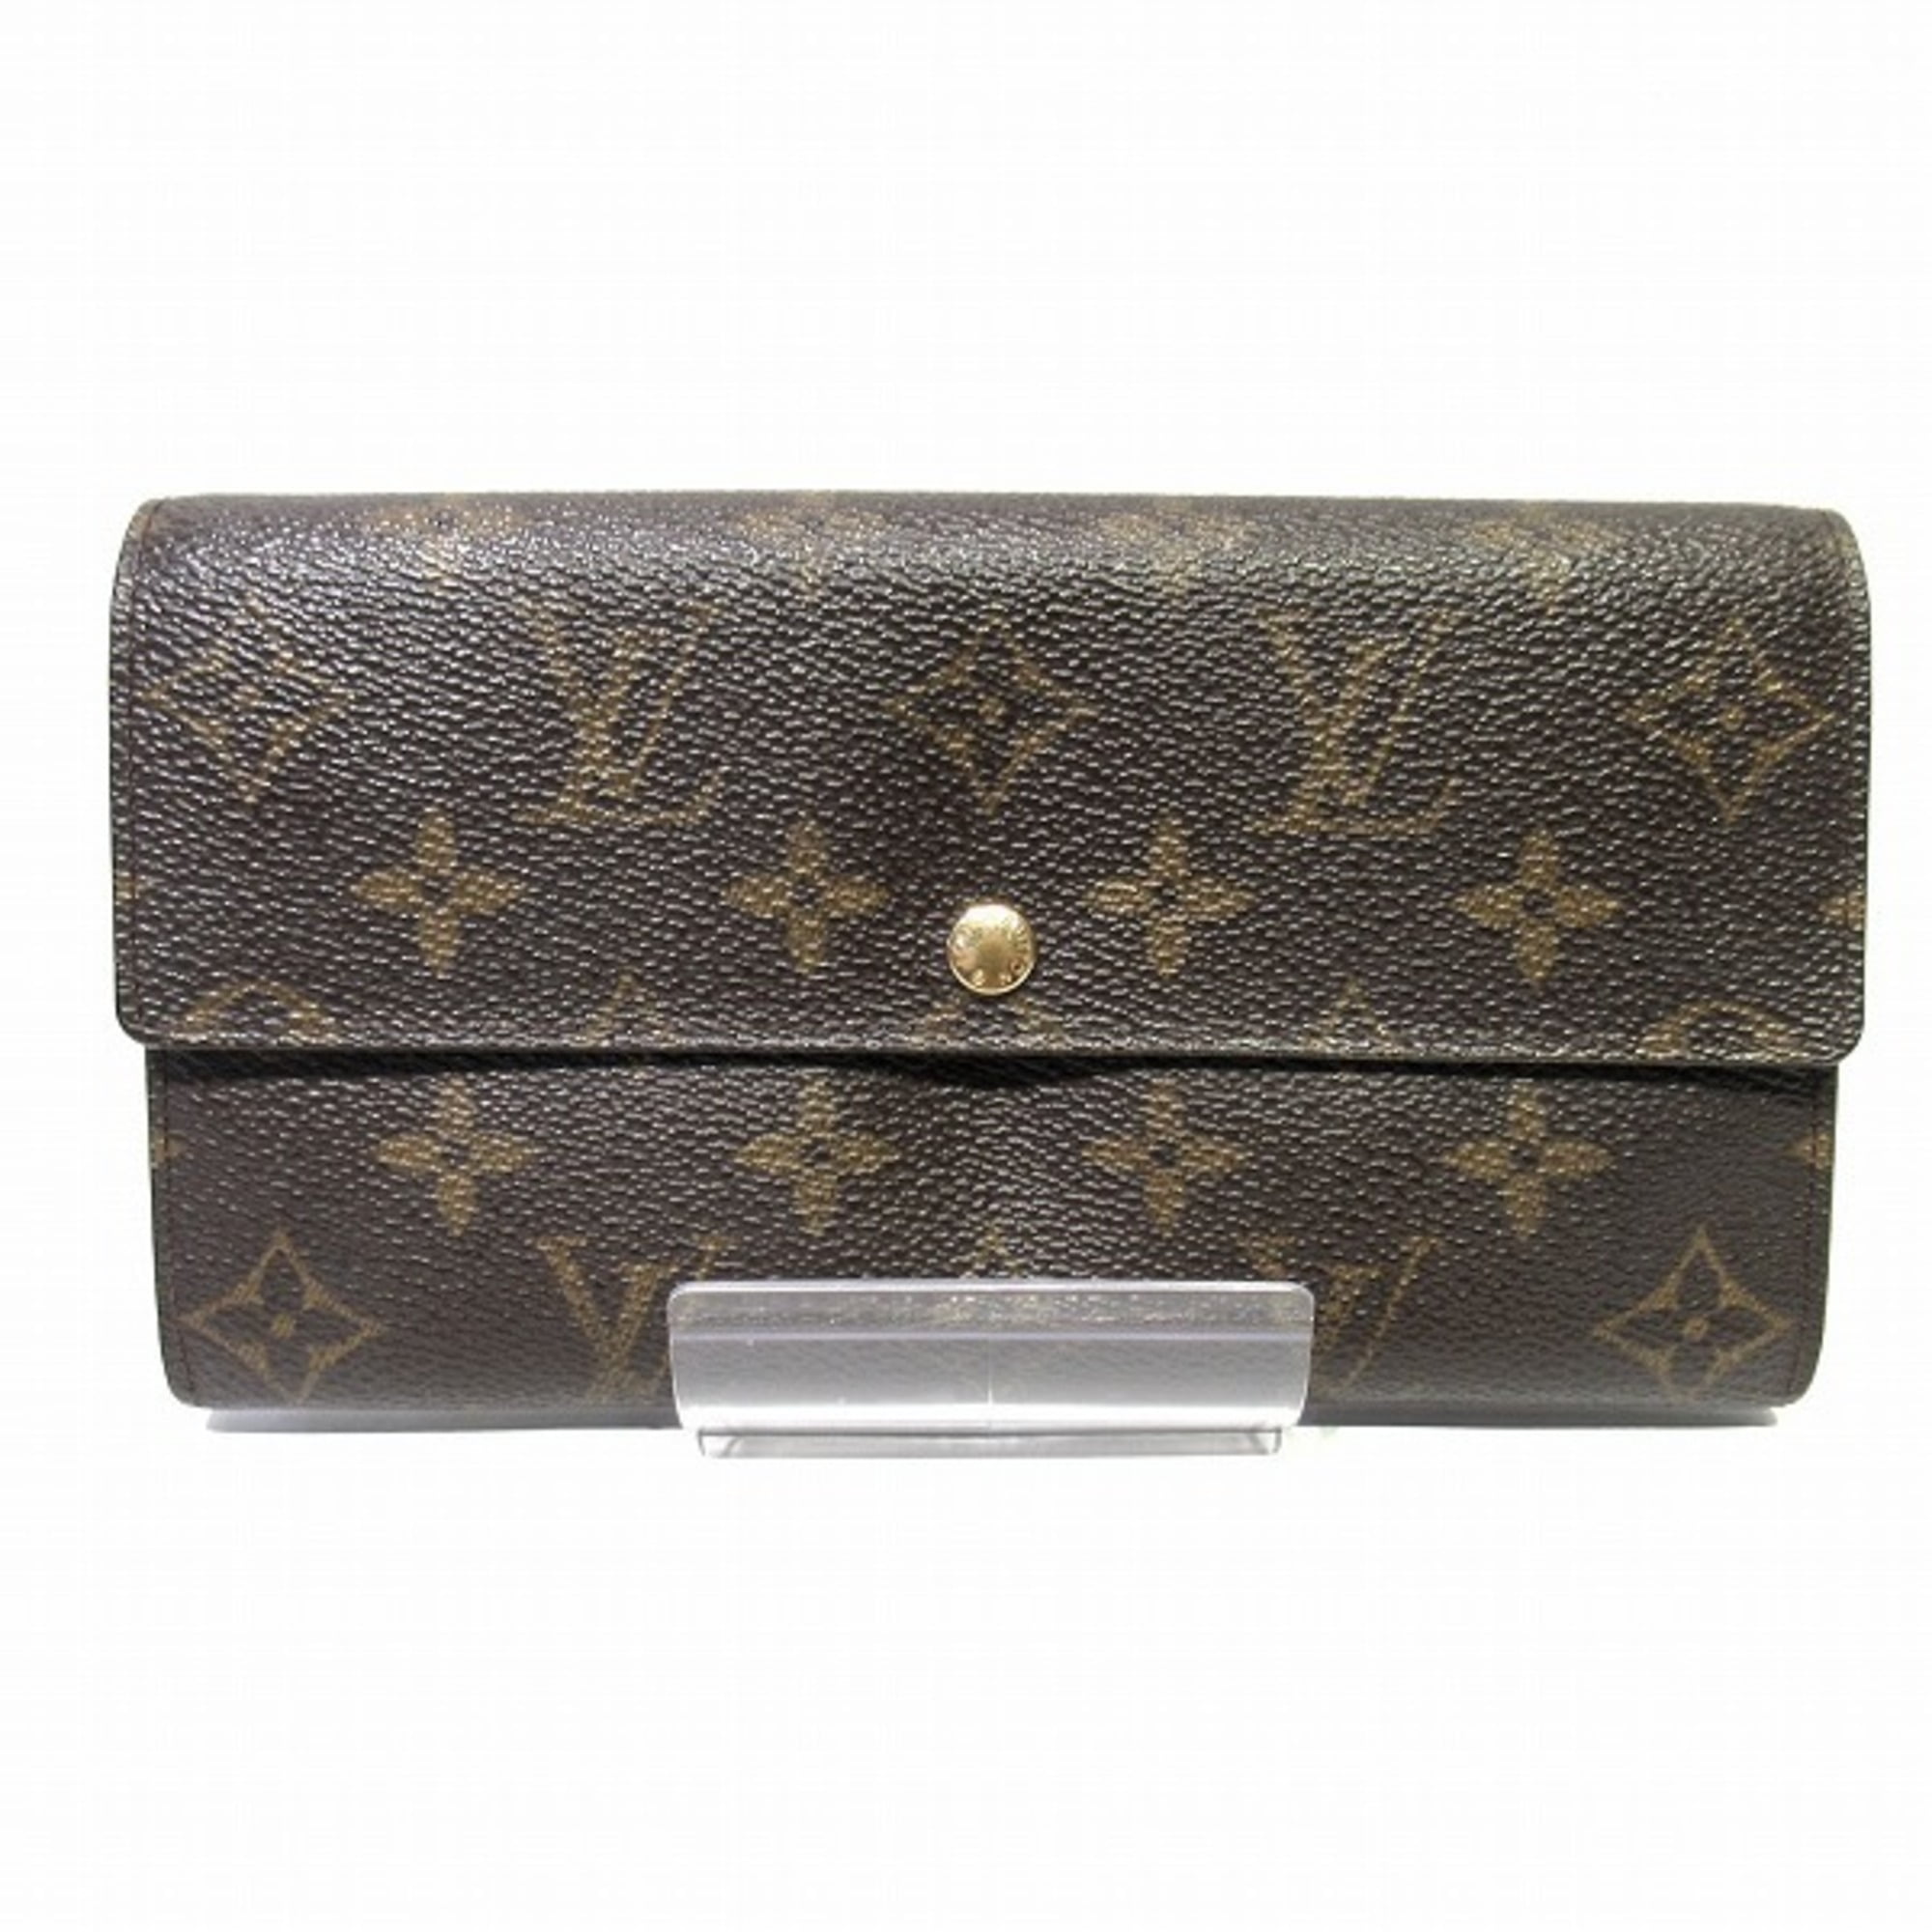 Used, Good condition Original Louis Vuitton signature Wallet Unisex -  clothing & accessories - by owner - apparel sale